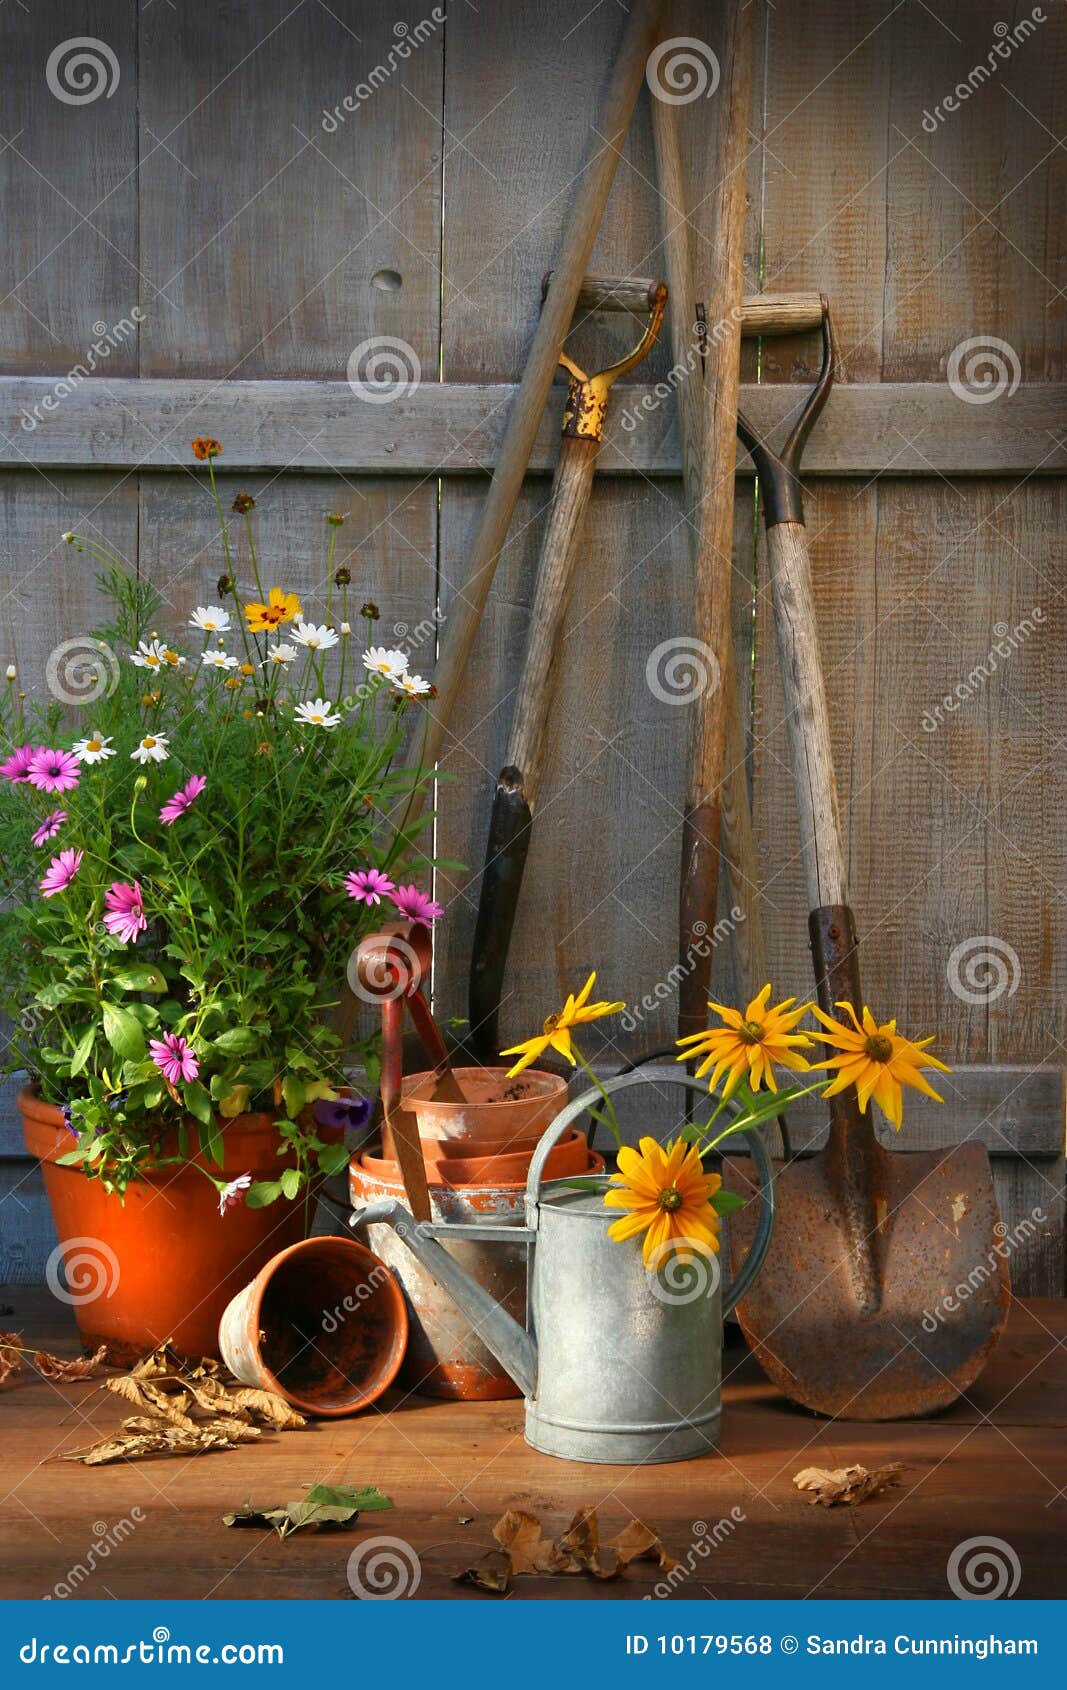 Garden Shed With Tools And Pots Royalty Free Stock Photos 